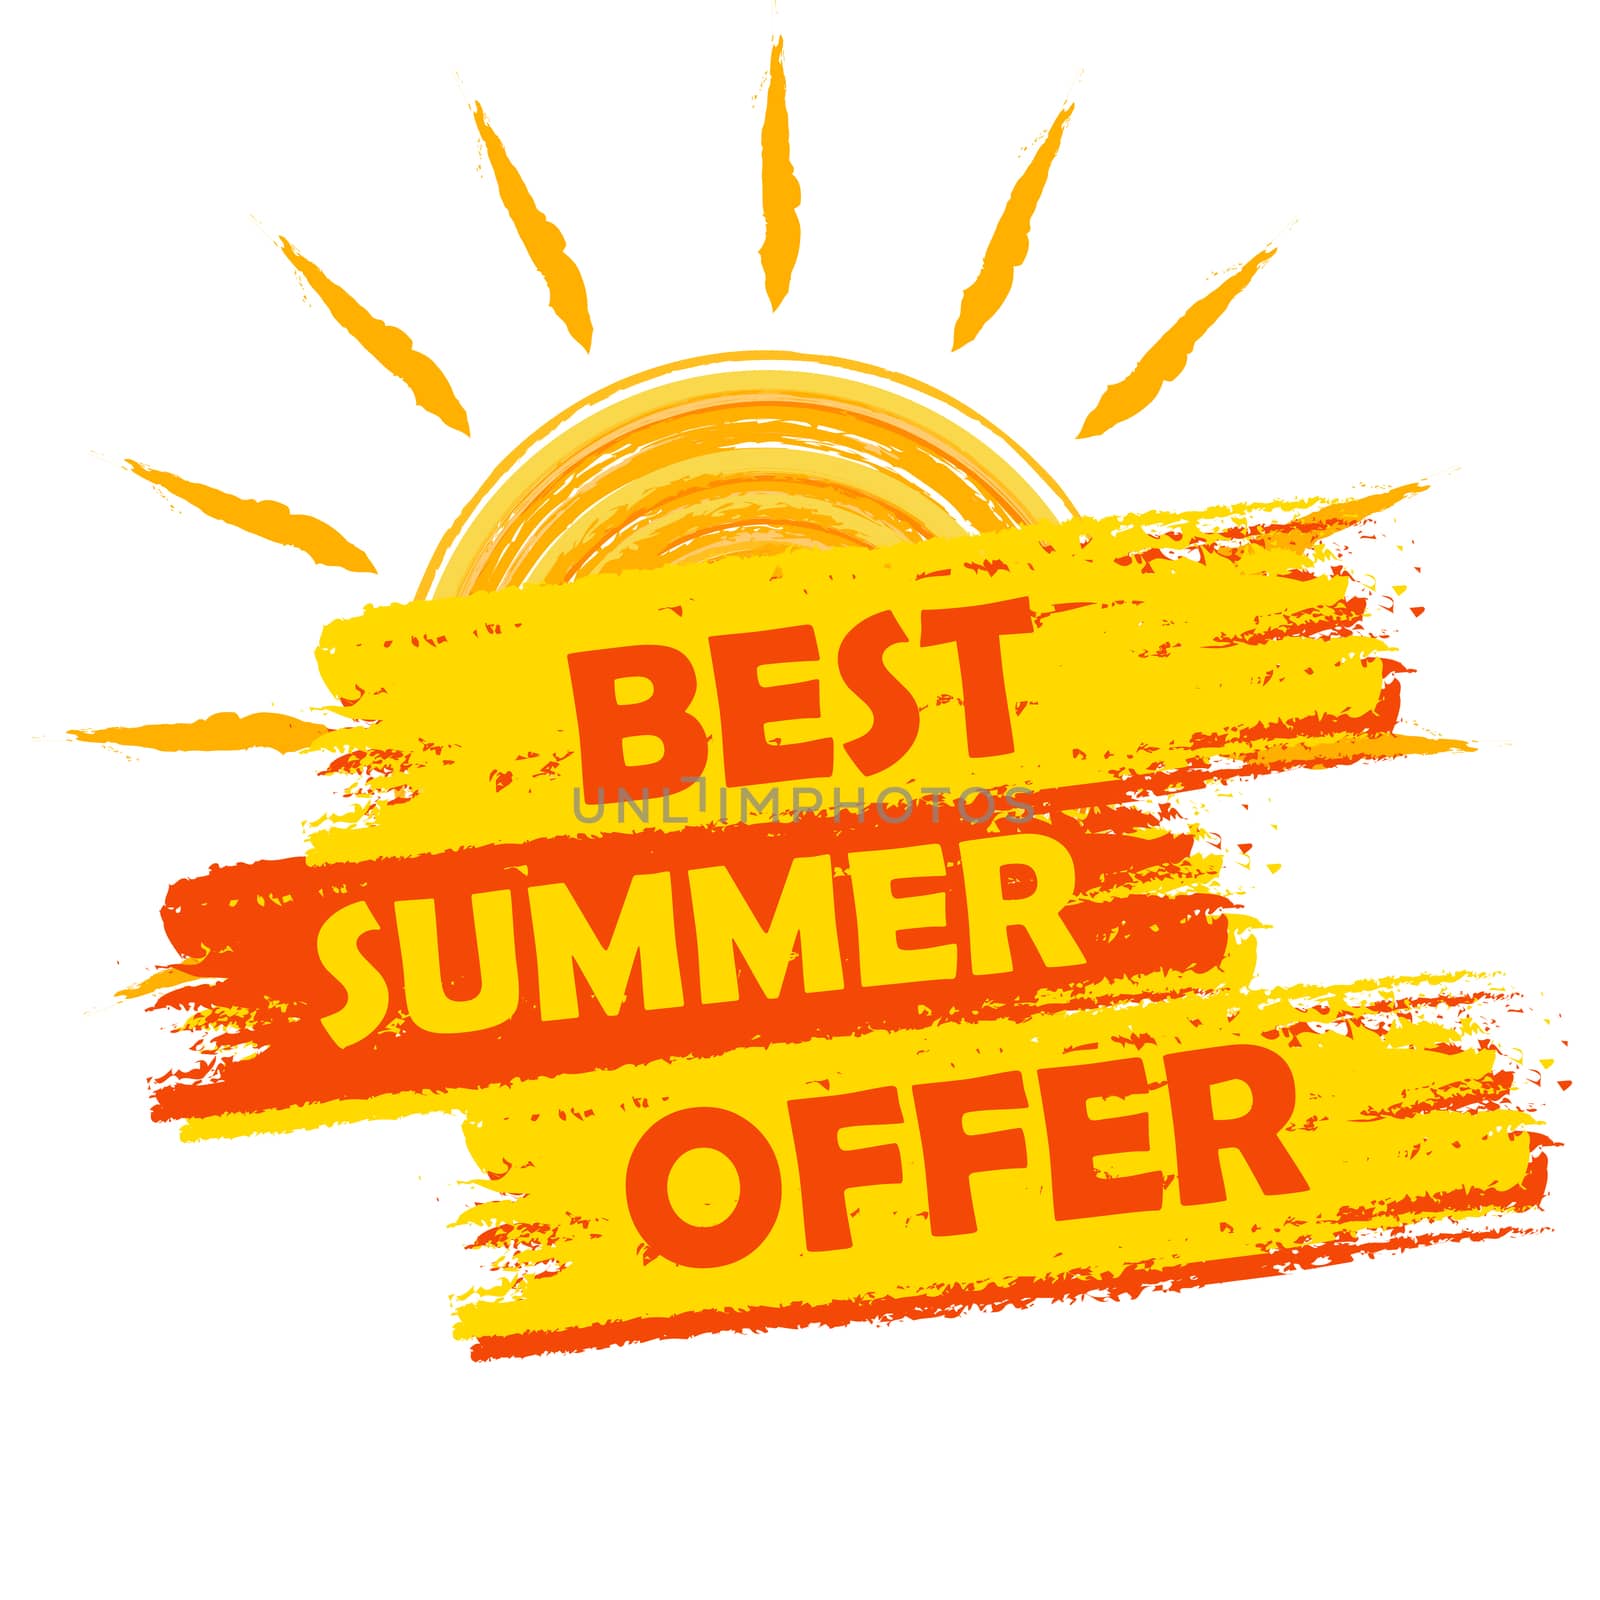 best summer offer with sun sign, yellow and orange drawn label by marinini